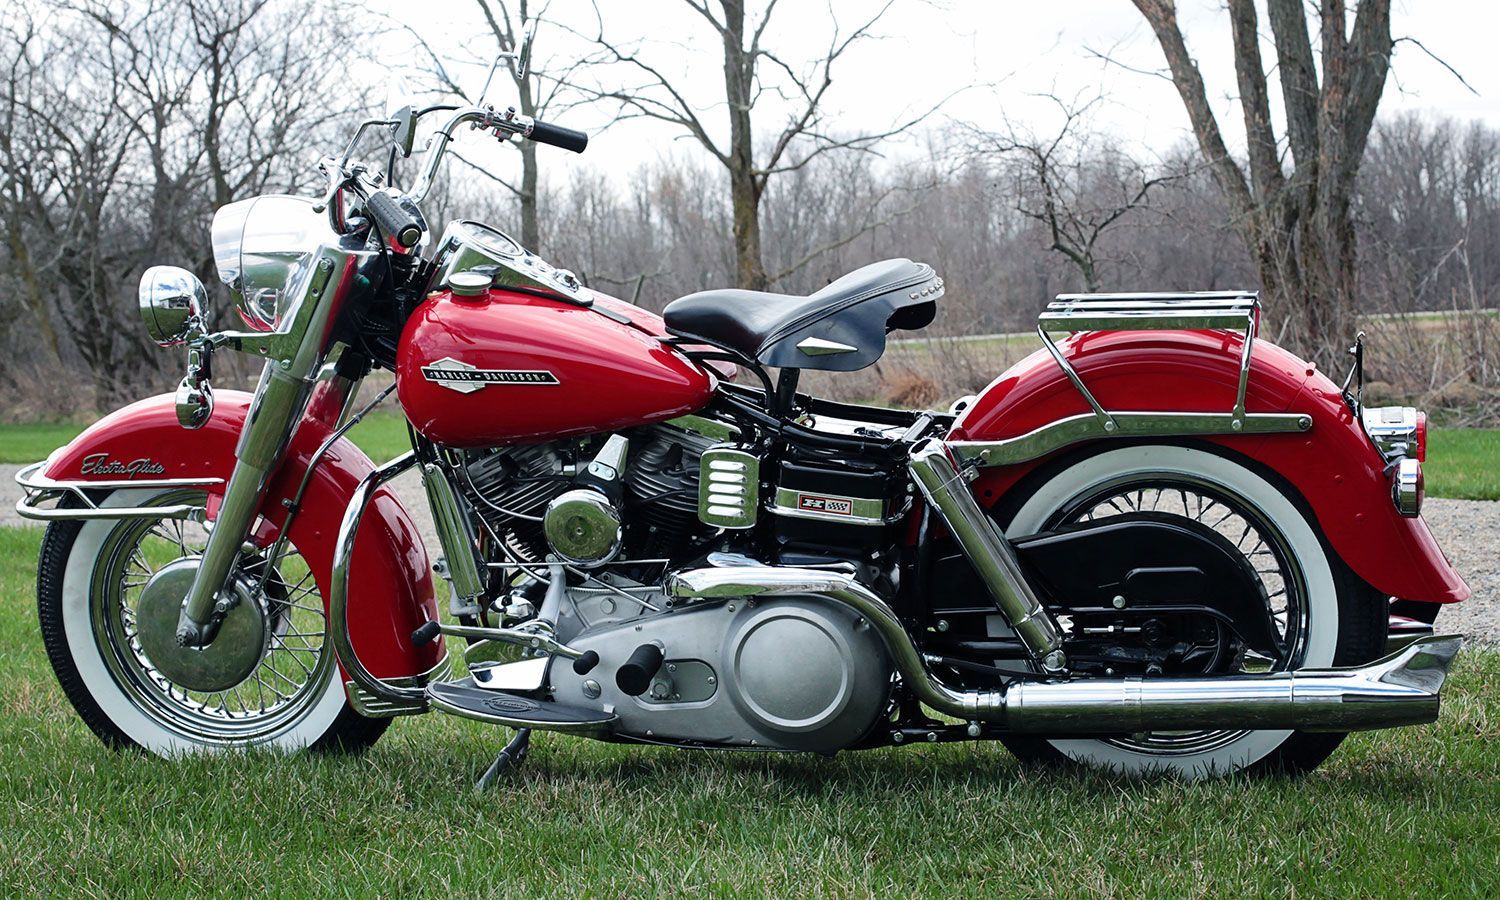 1965 FLH Electra Glide parked outside